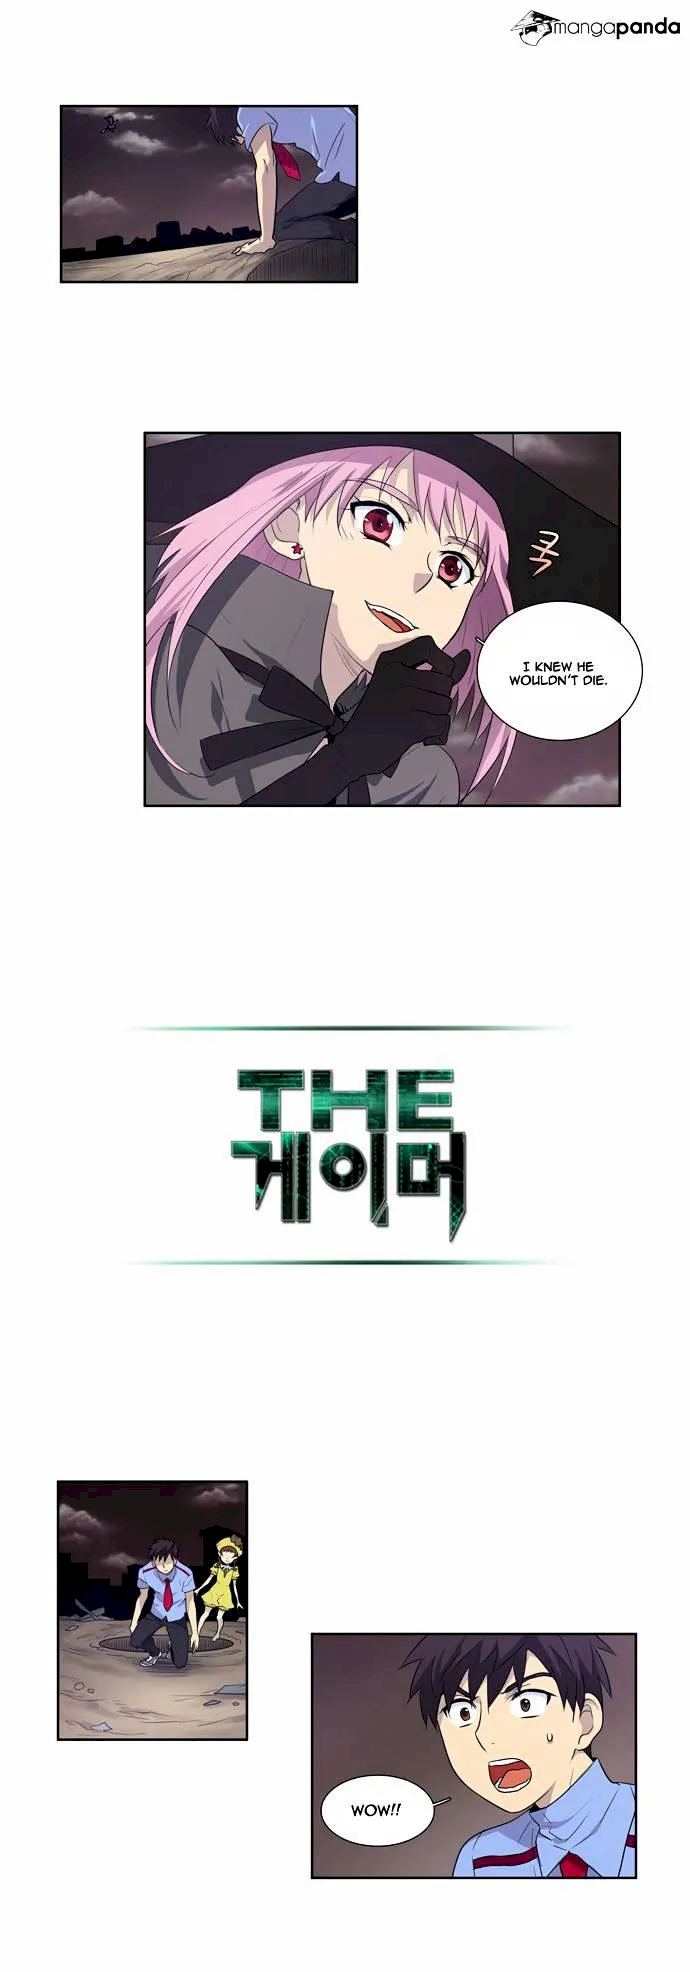 The Gamer - Chapter 64 Page 15